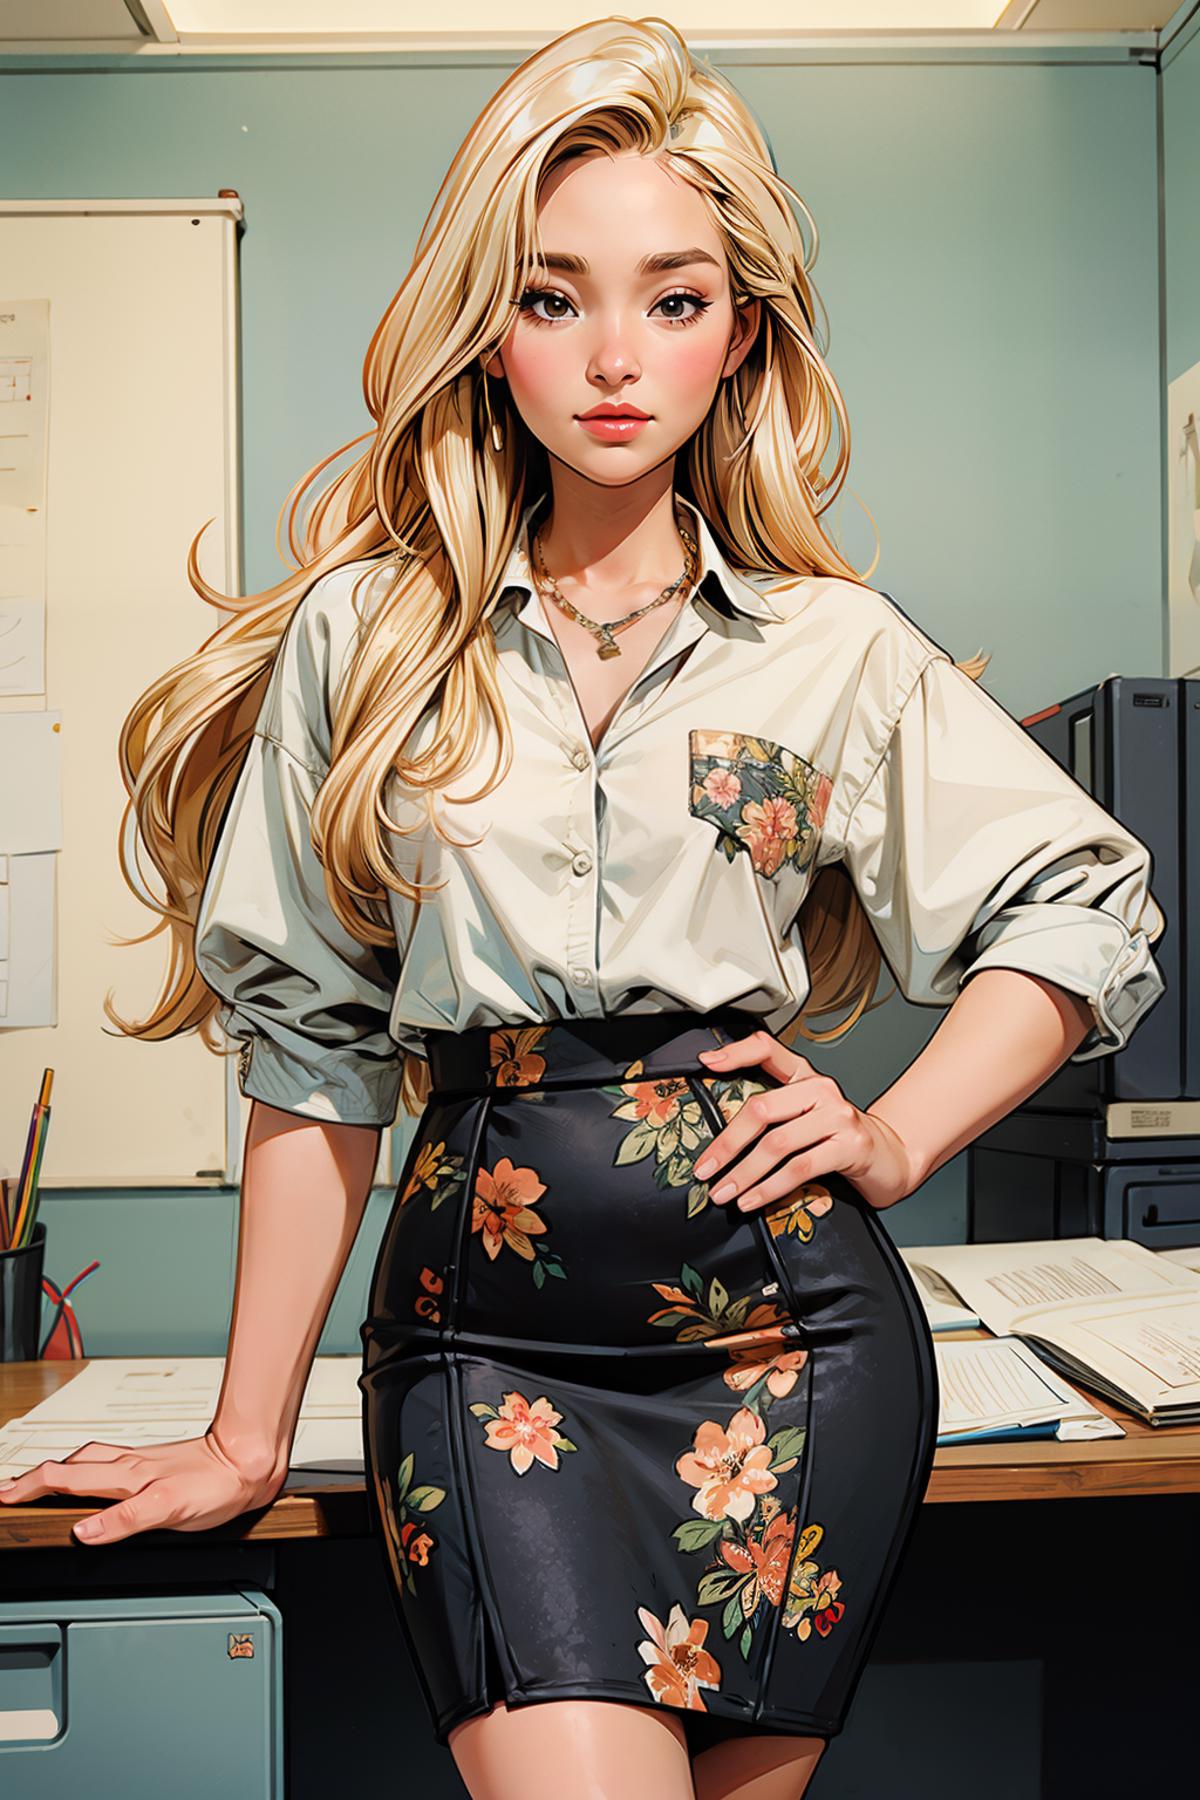 Cartoon Drawing of a Blonde Woman in a White Shirt and Floral Skirt Posing with Her Hands on Her Hips.